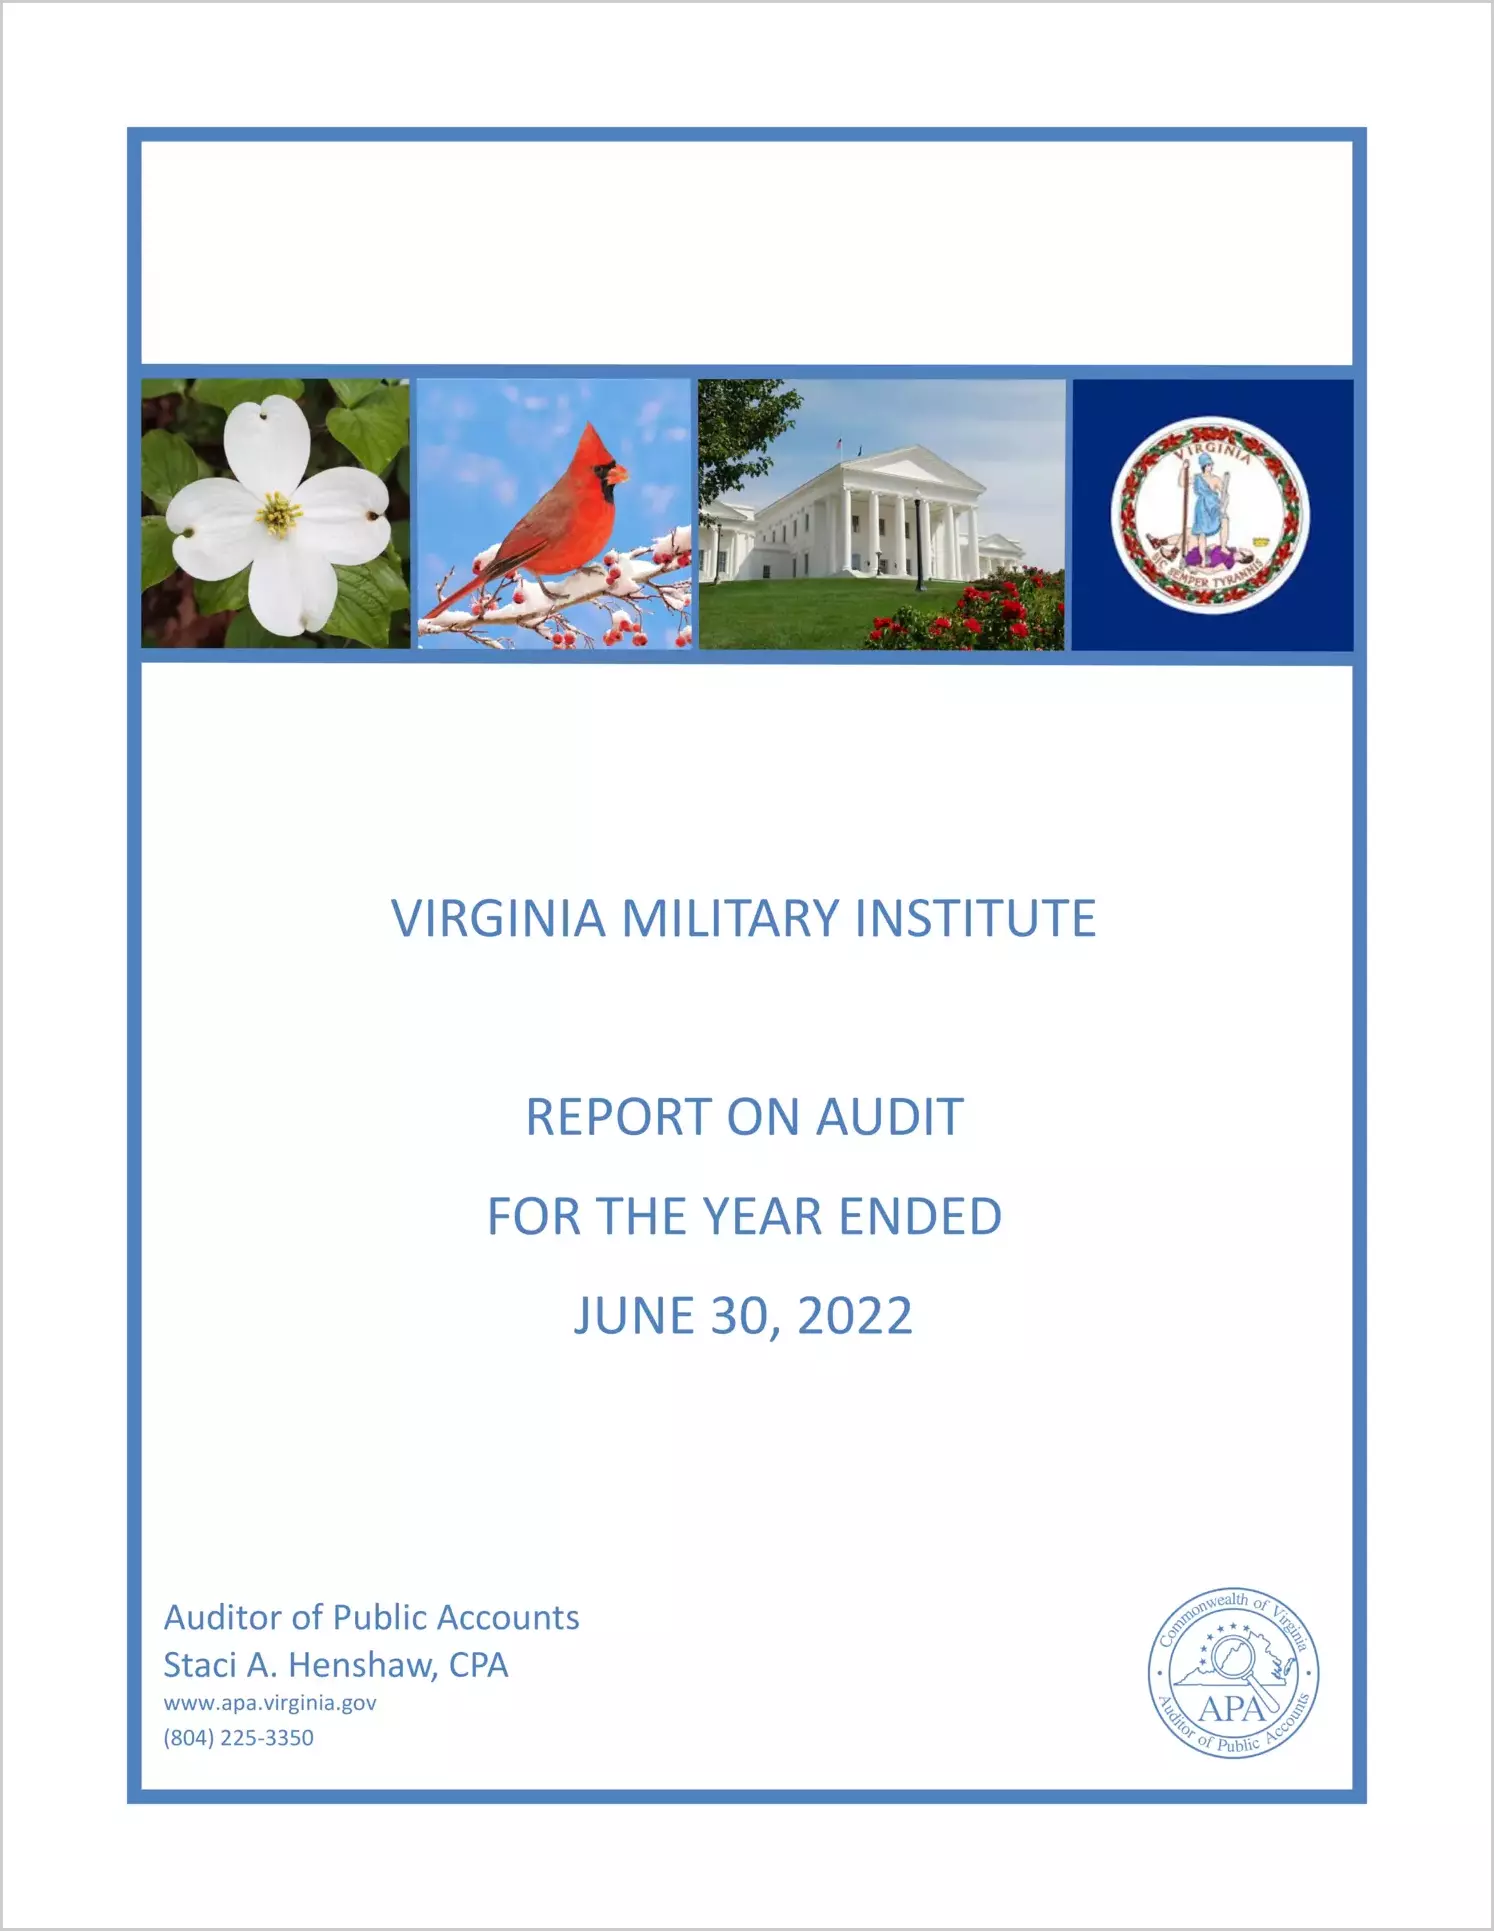 Virginia Military Institute for the year ended June 30, 2022